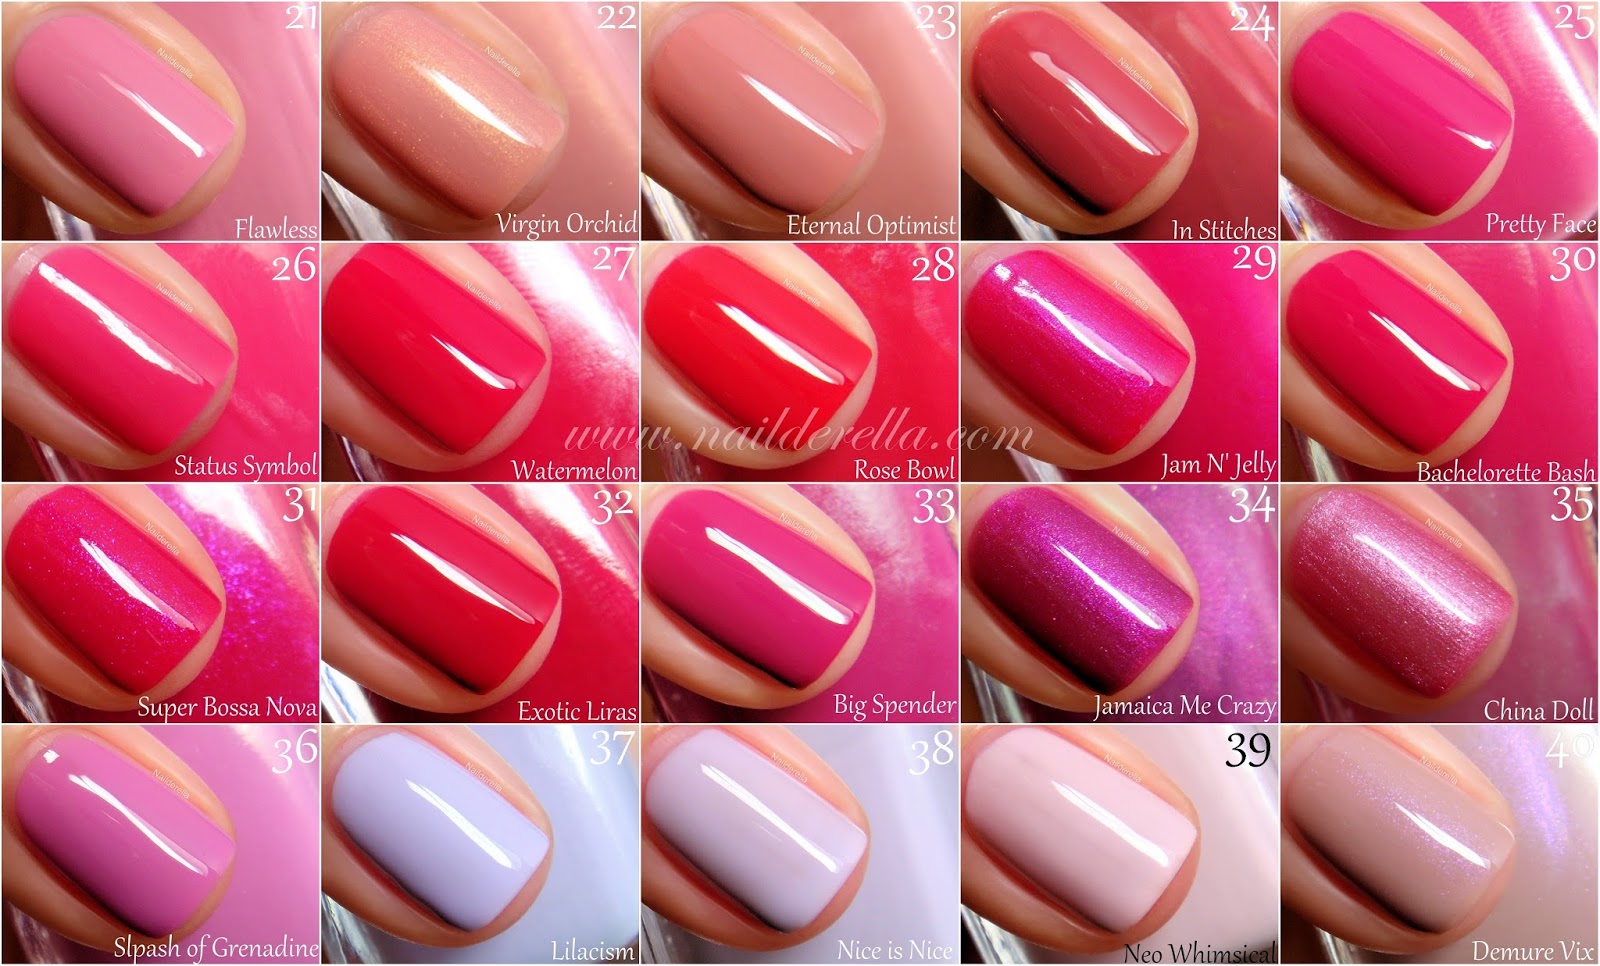 8. Essie 2020 Winter Nail Polish Collection - wide 2